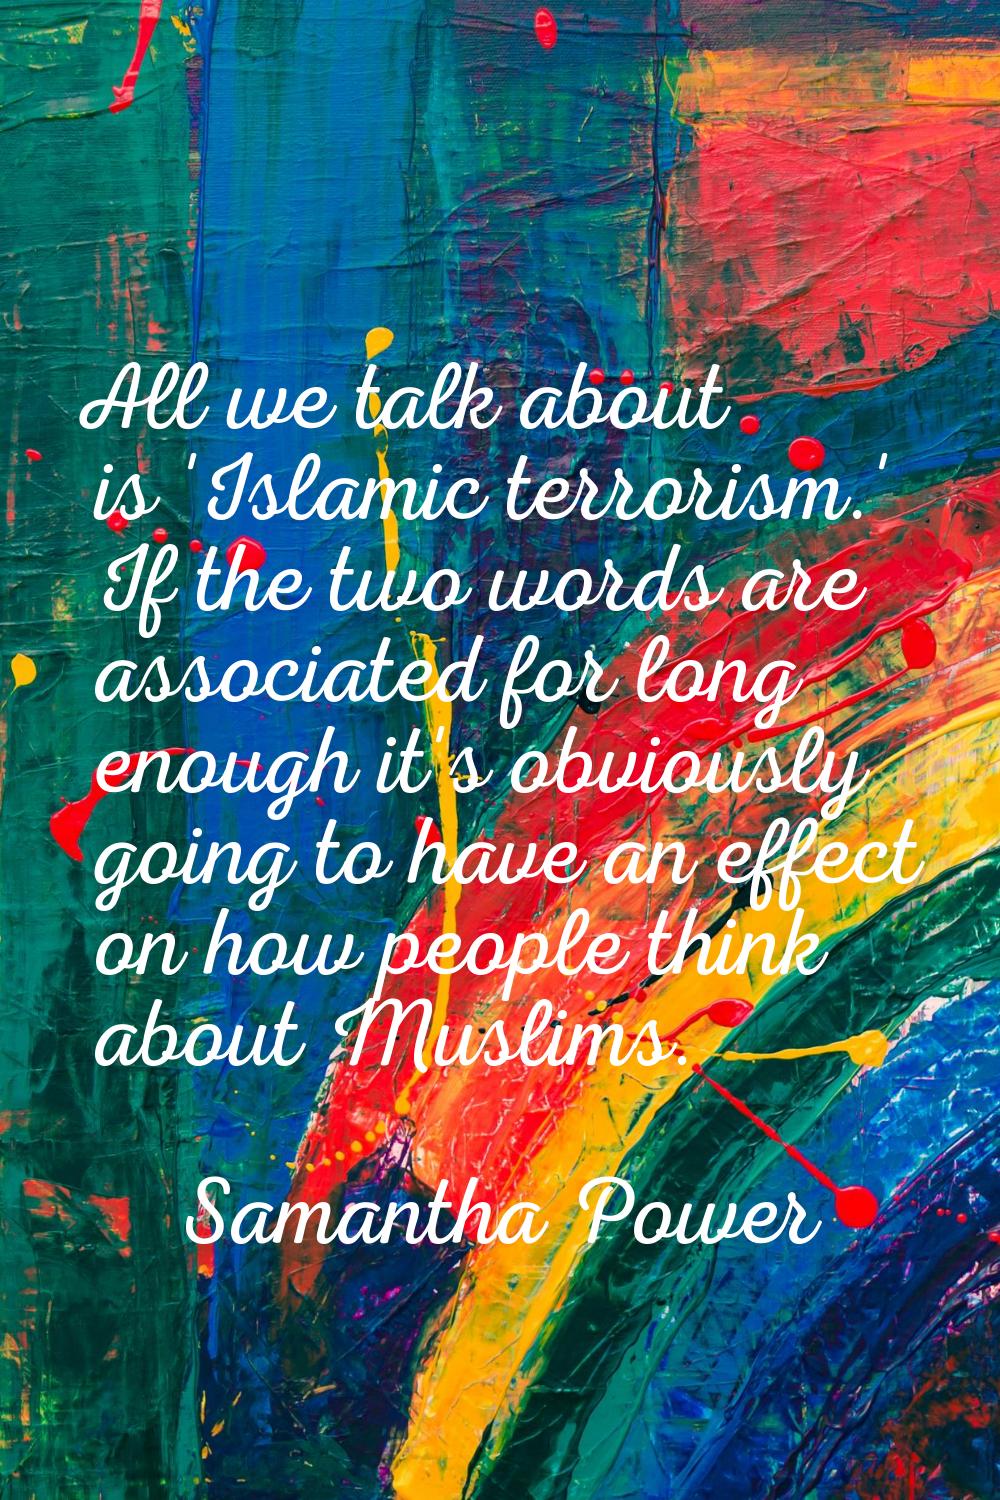 All we talk about is 'Islamic terrorism.' If the two words are associated for long enough it's obvi